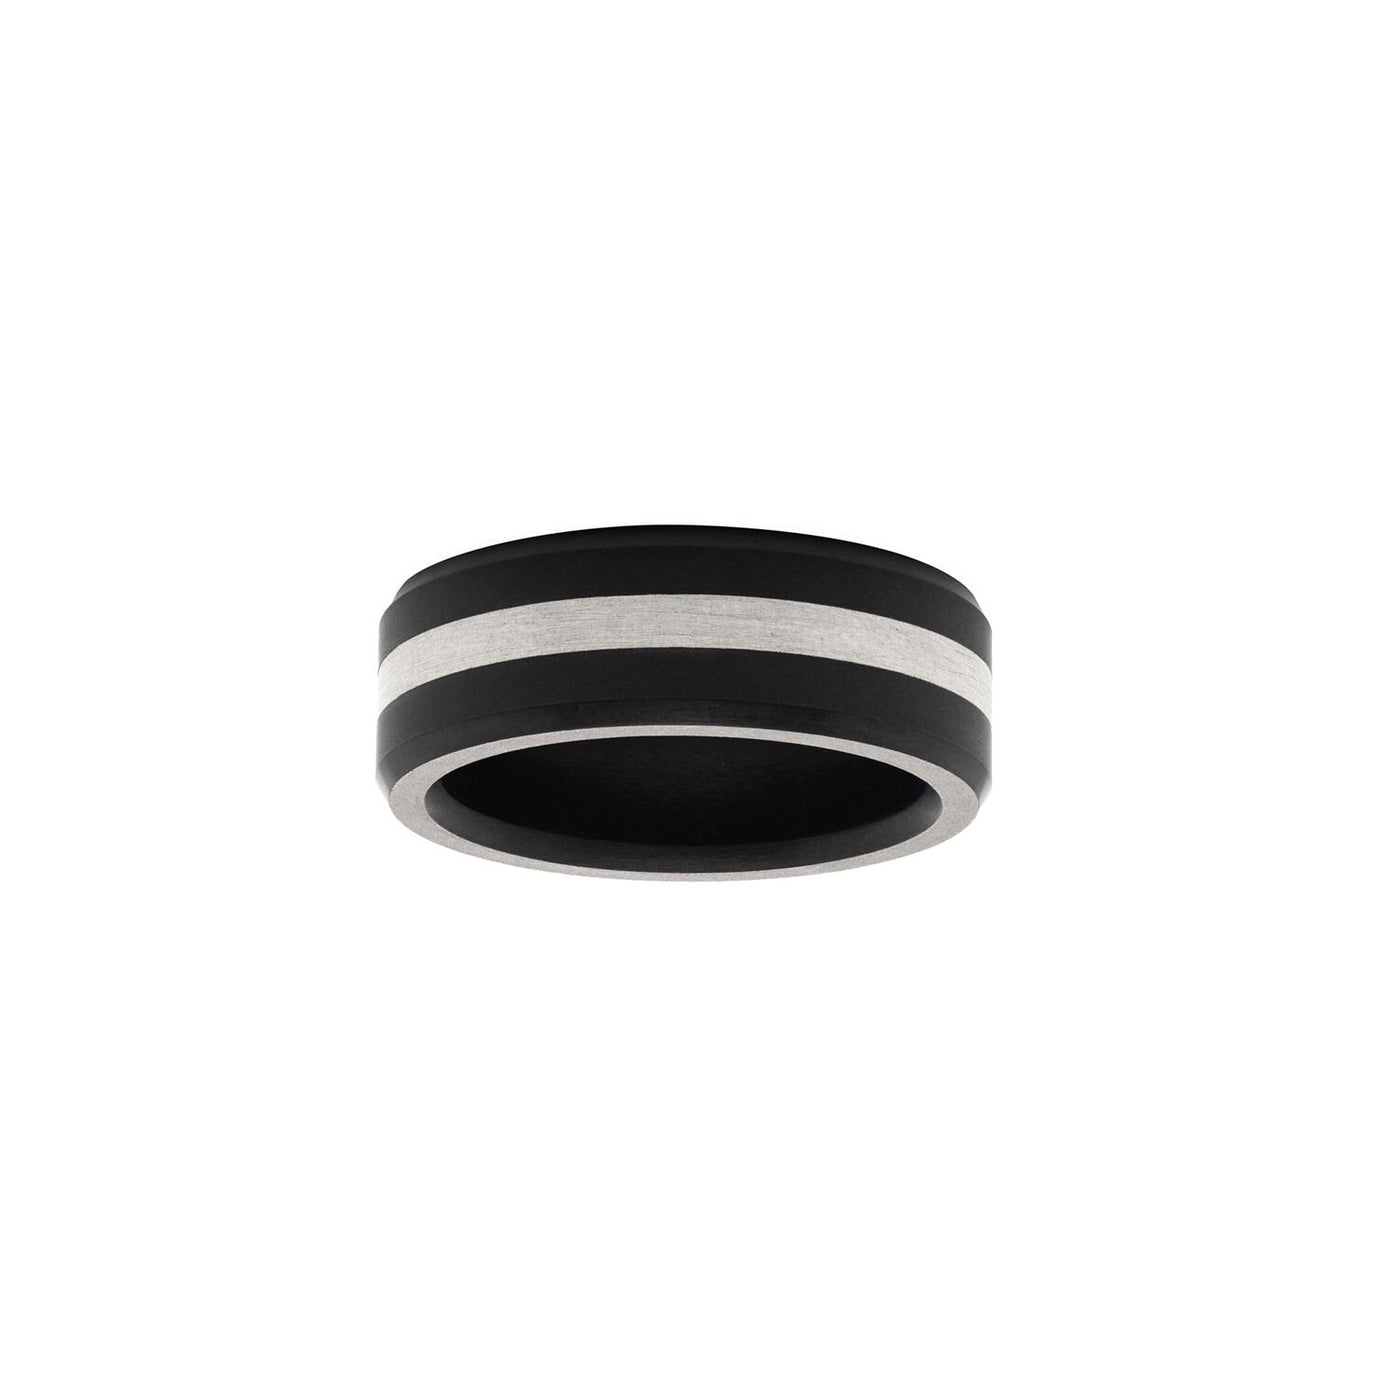 Elysium Ares Beveled Edge Black Diamond Ring with Stirling Silver Inlay